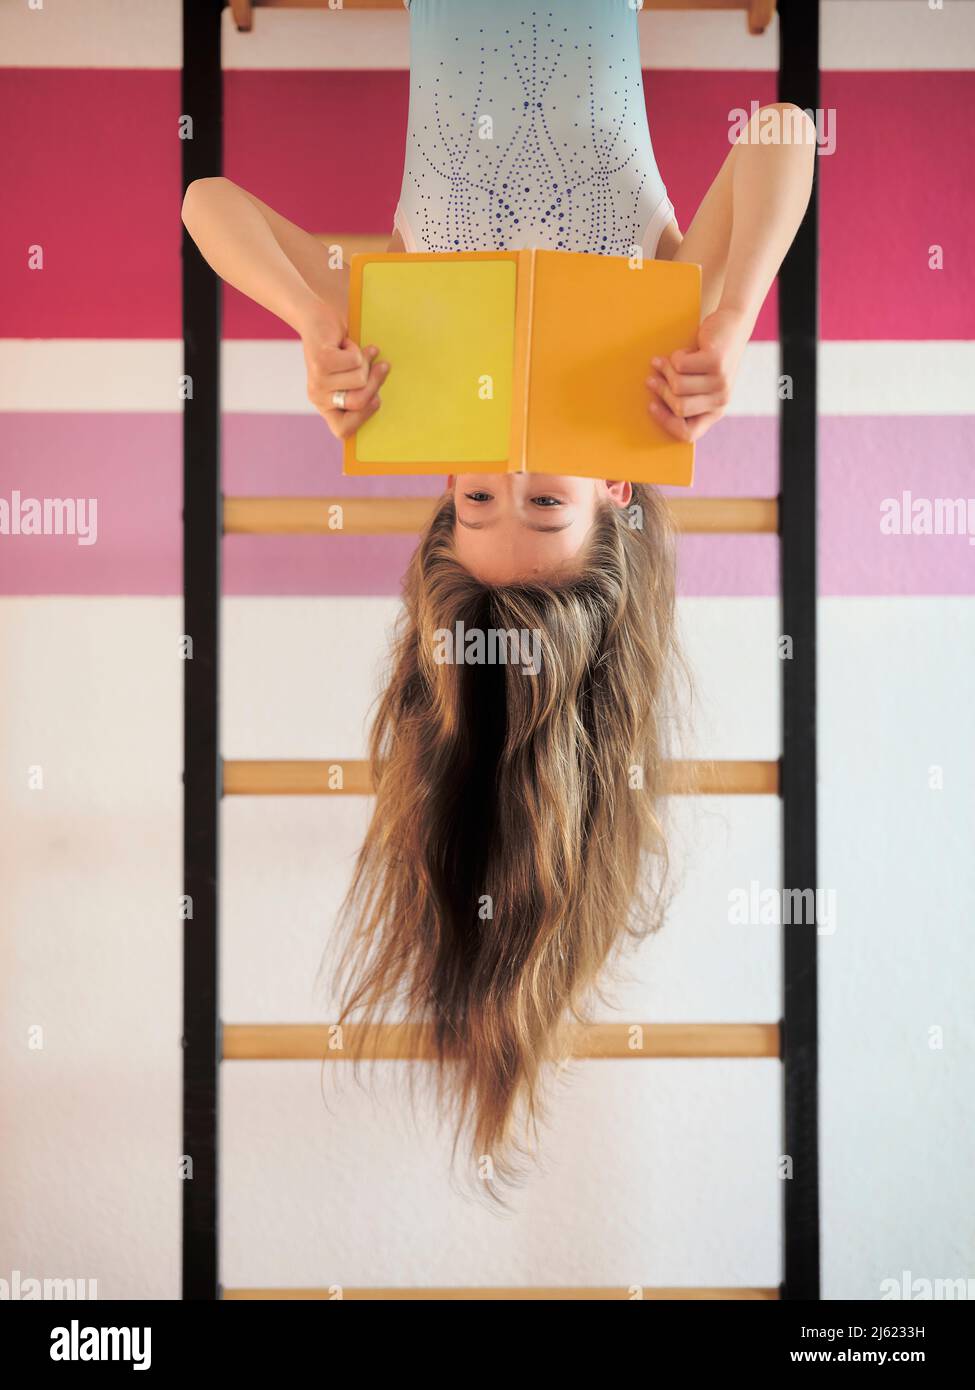 Girl reading book hanging upside down on wall bars Stock Photo